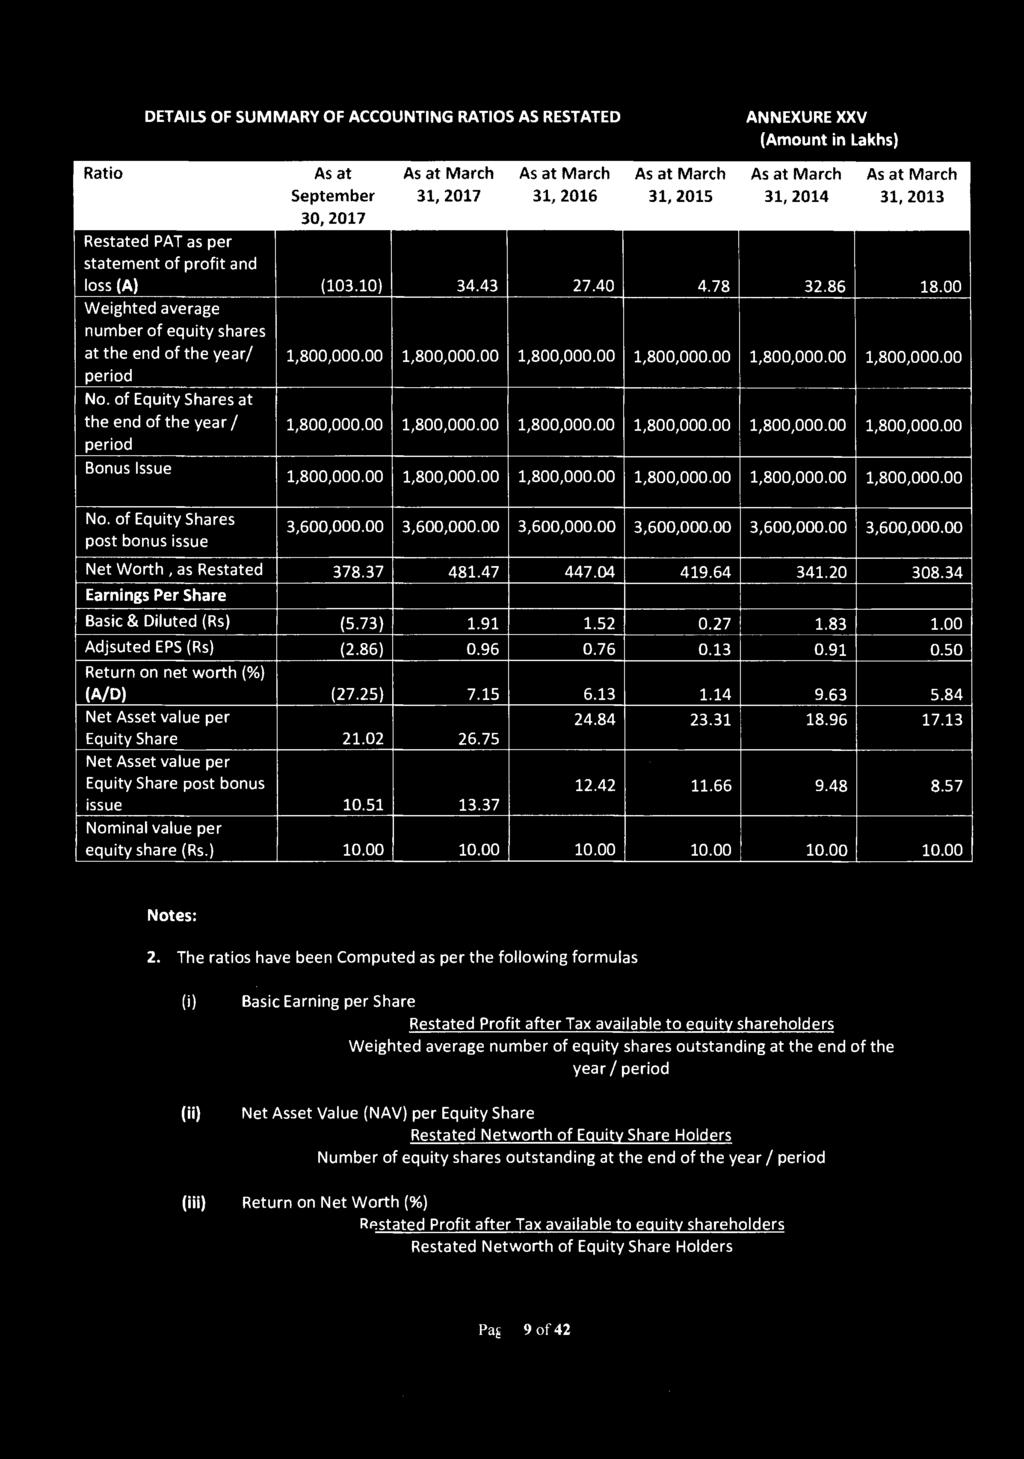 DETAILS OF SUMMARY OF ACCOUNTING RATIOS AS RESTATED ANNEXURE XXV (Amount in Lakhs) Ratio As at As at March As at March As at March As at March As at March September 31,2017 31, 2016 31,2015 31,2014